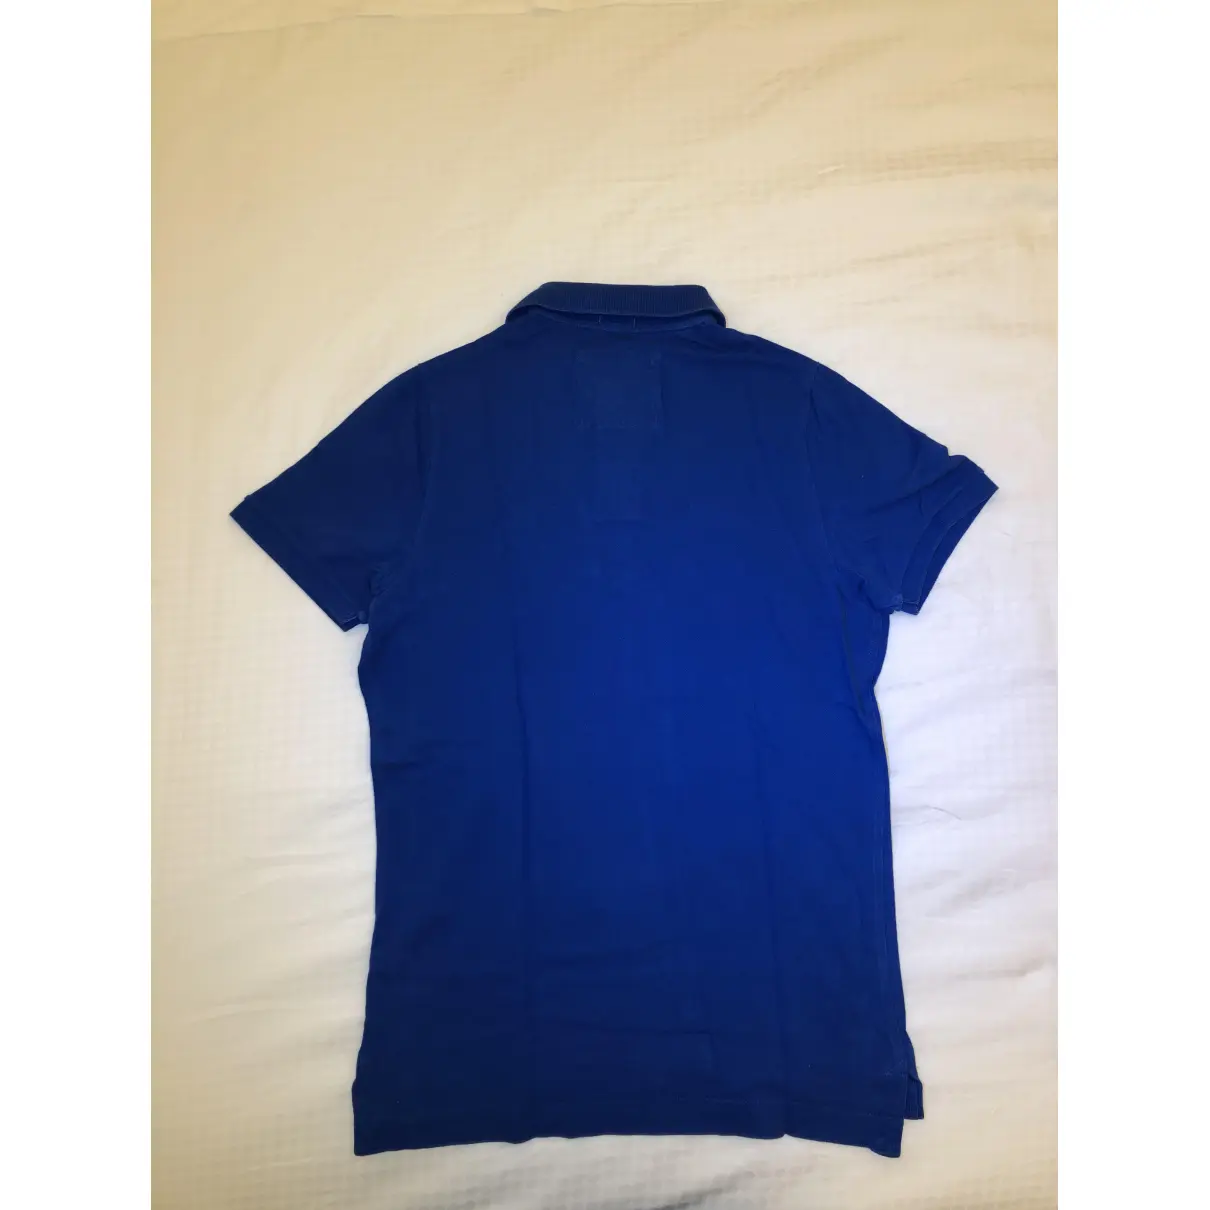 Buy Abercrombie & Fitch Polo shirt online